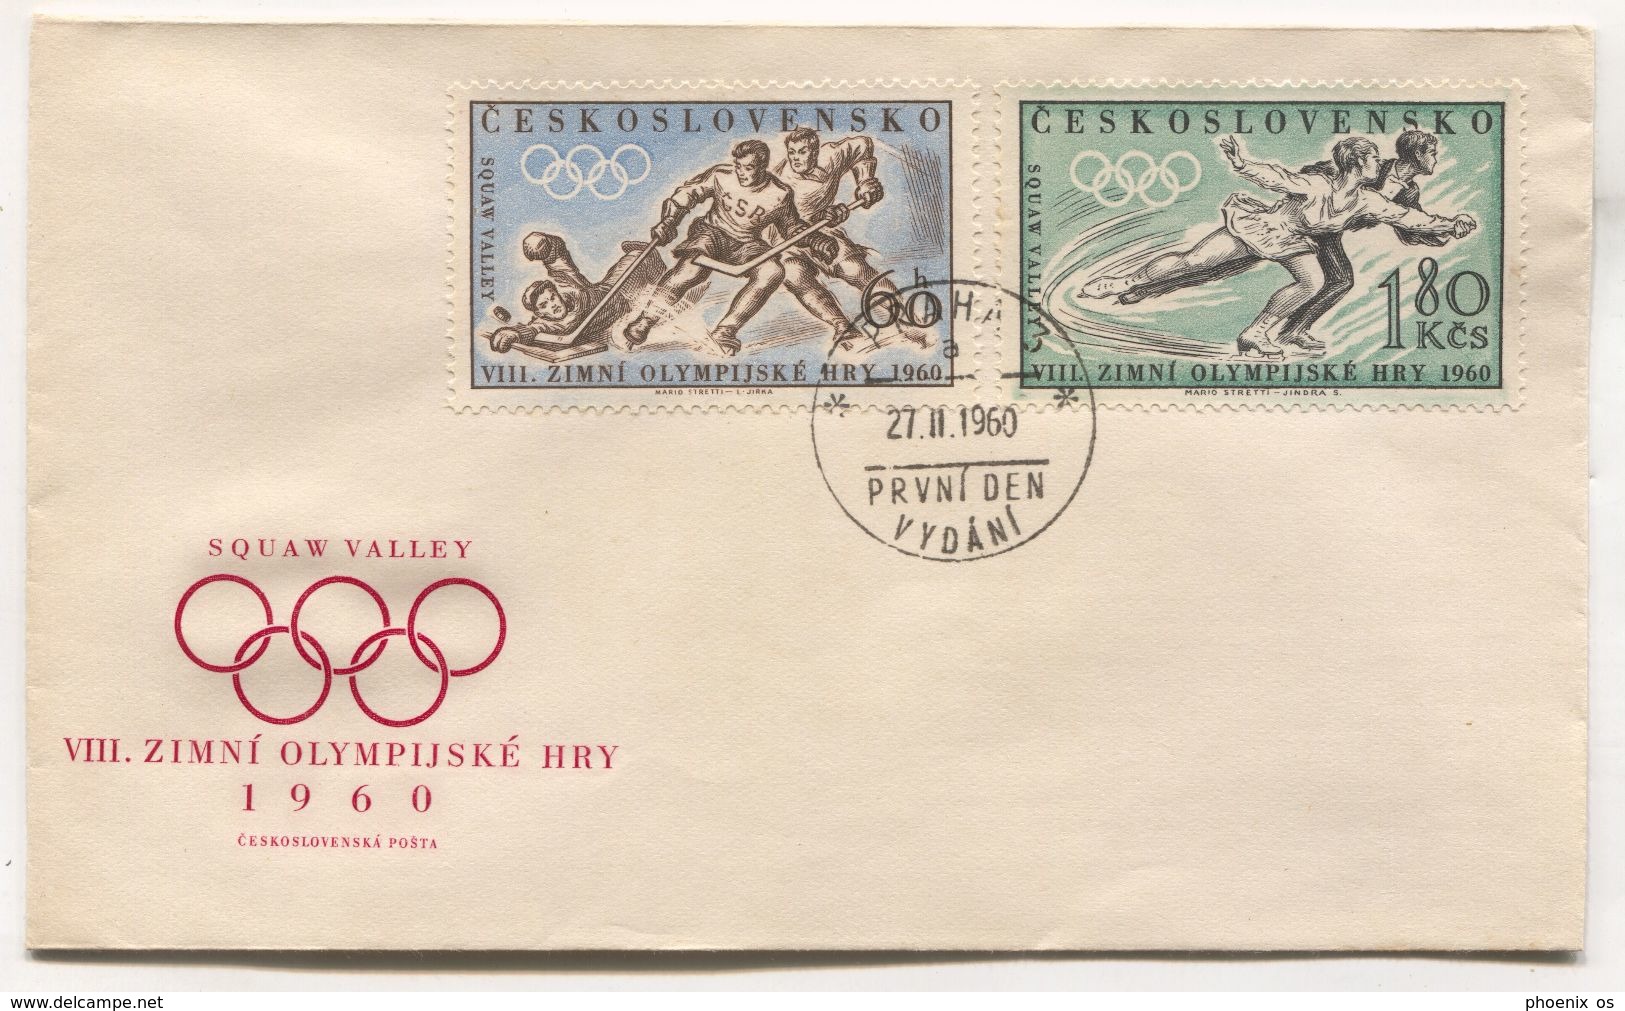 WINTER OLYMPICS / OLYMPIAD, SQUAW VALLEY 1960. CALIFORNIA USA, FDC COVER CZECHOSLOVAK - Winter 1960: Squaw Valley